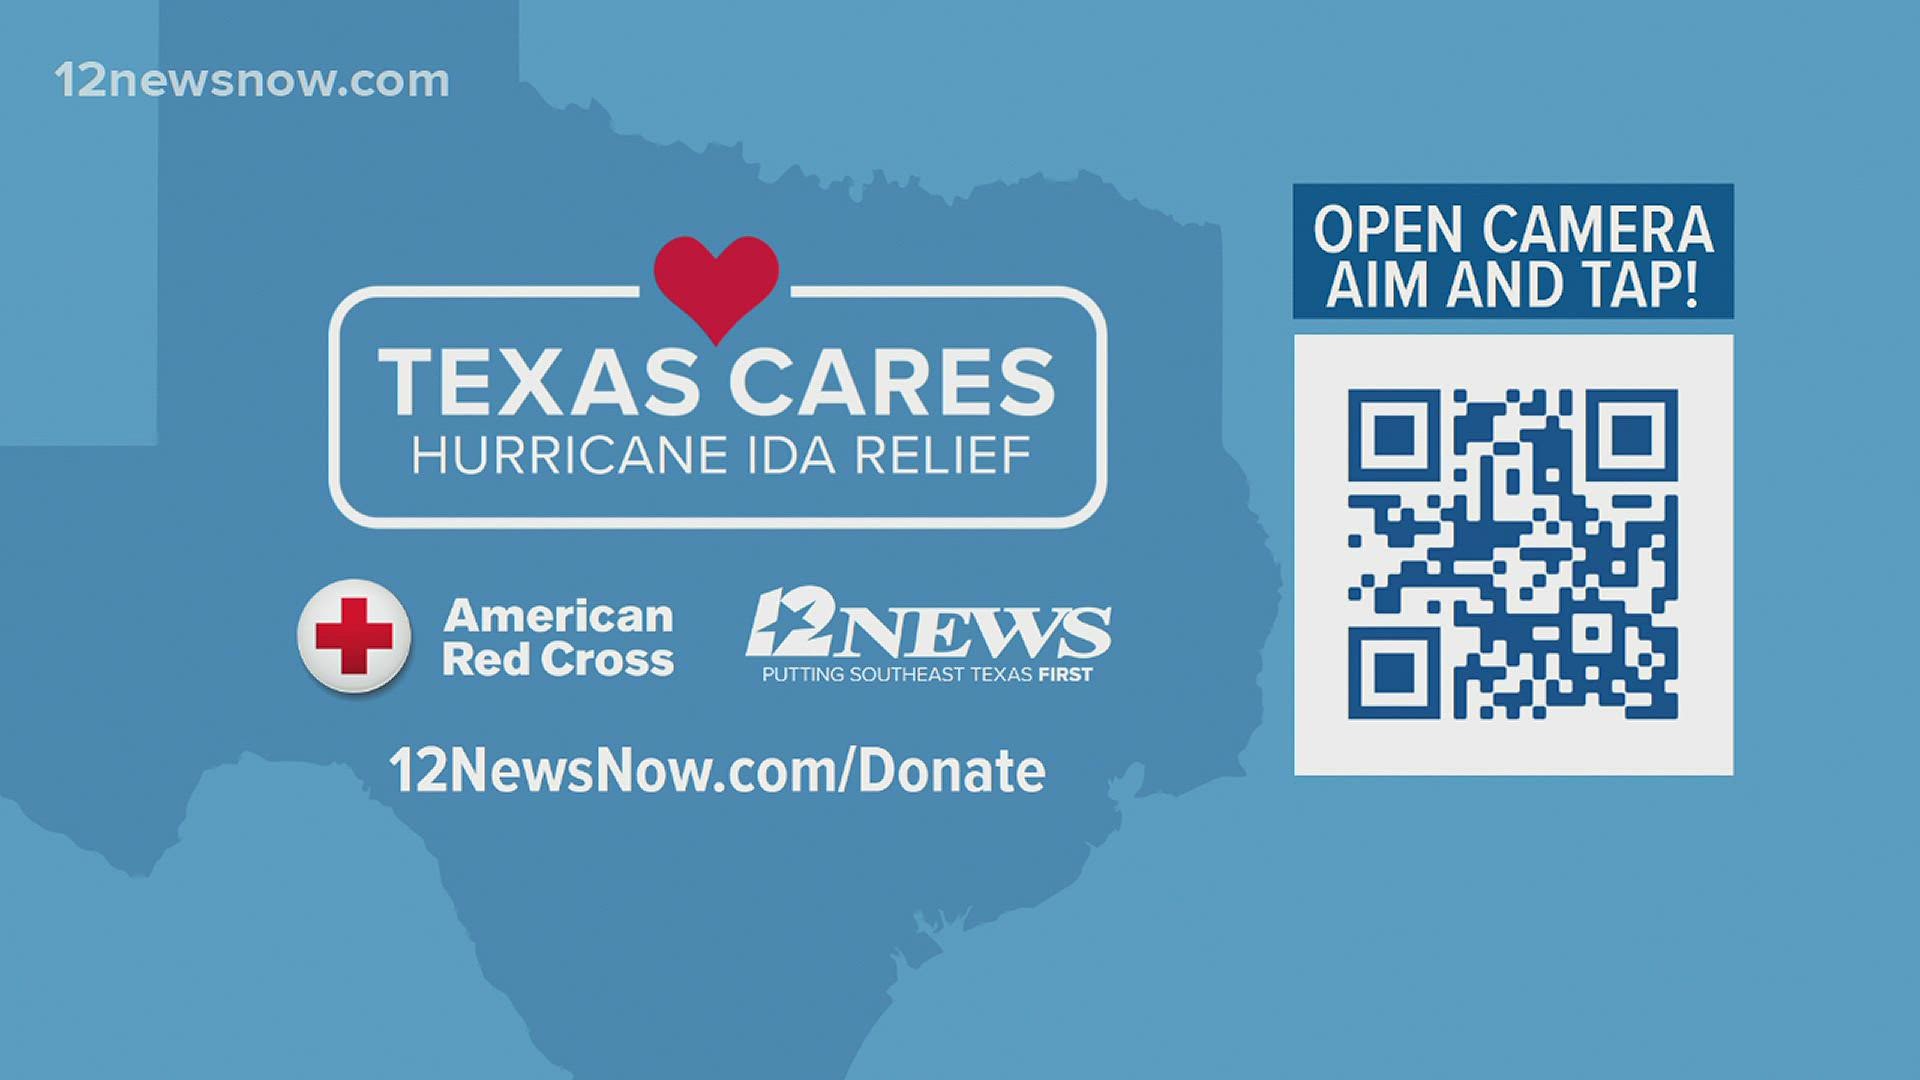 Donations will go directly to the American Red Cross’ Hurricane Ida relief efforts.